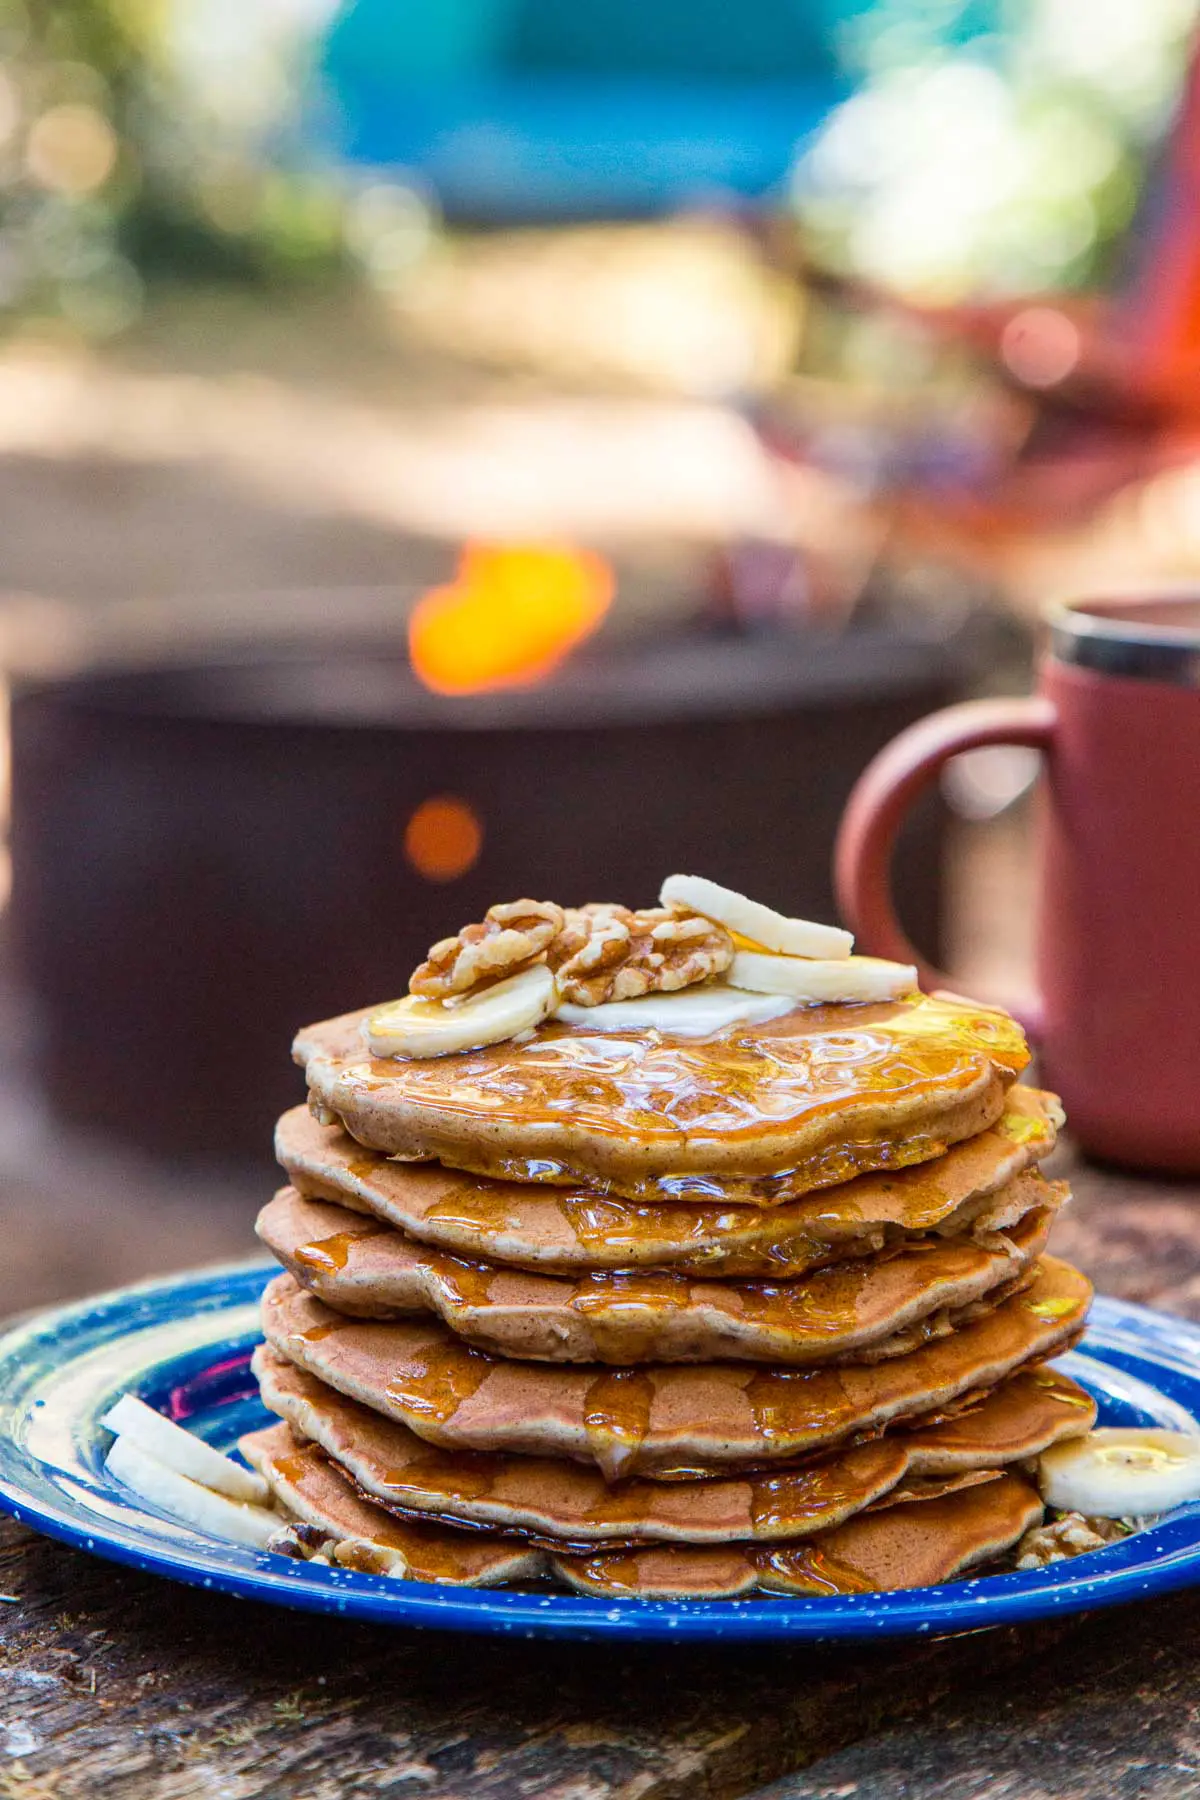 A stack of pancakes on a blue plate, topped with slices of bananas and walnuts and a camping scene in the background.